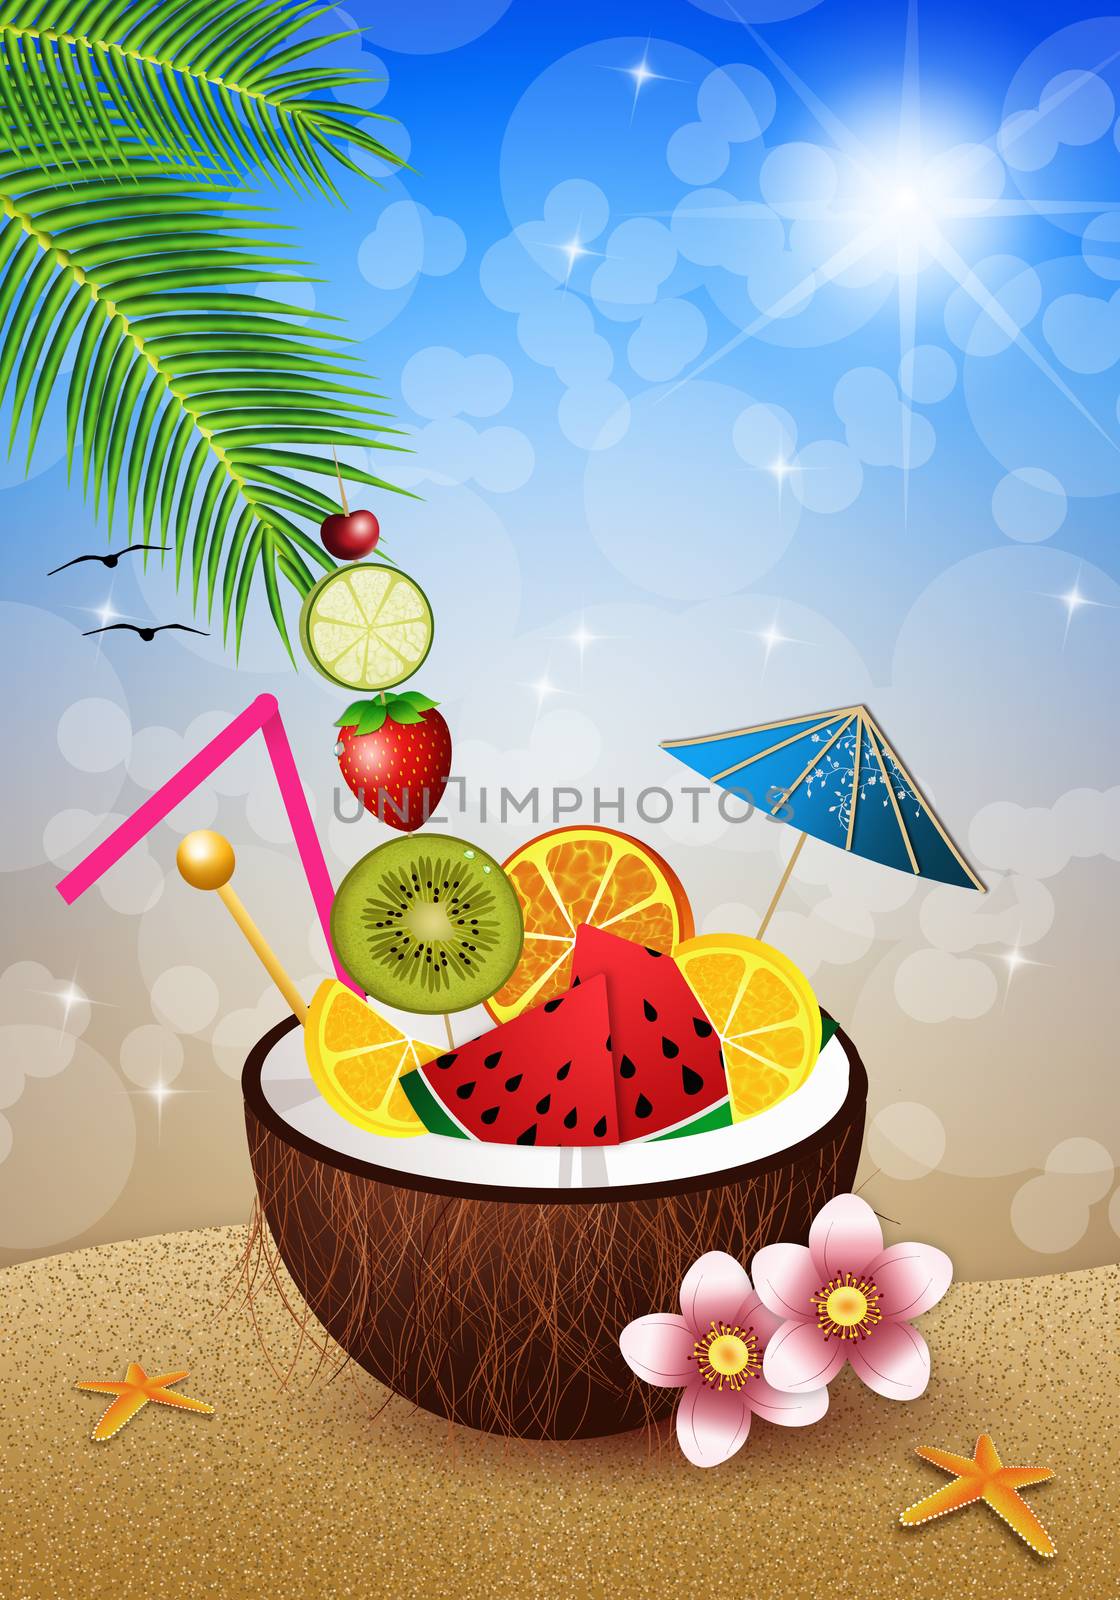 illustration of Coconut with fruits on the beach